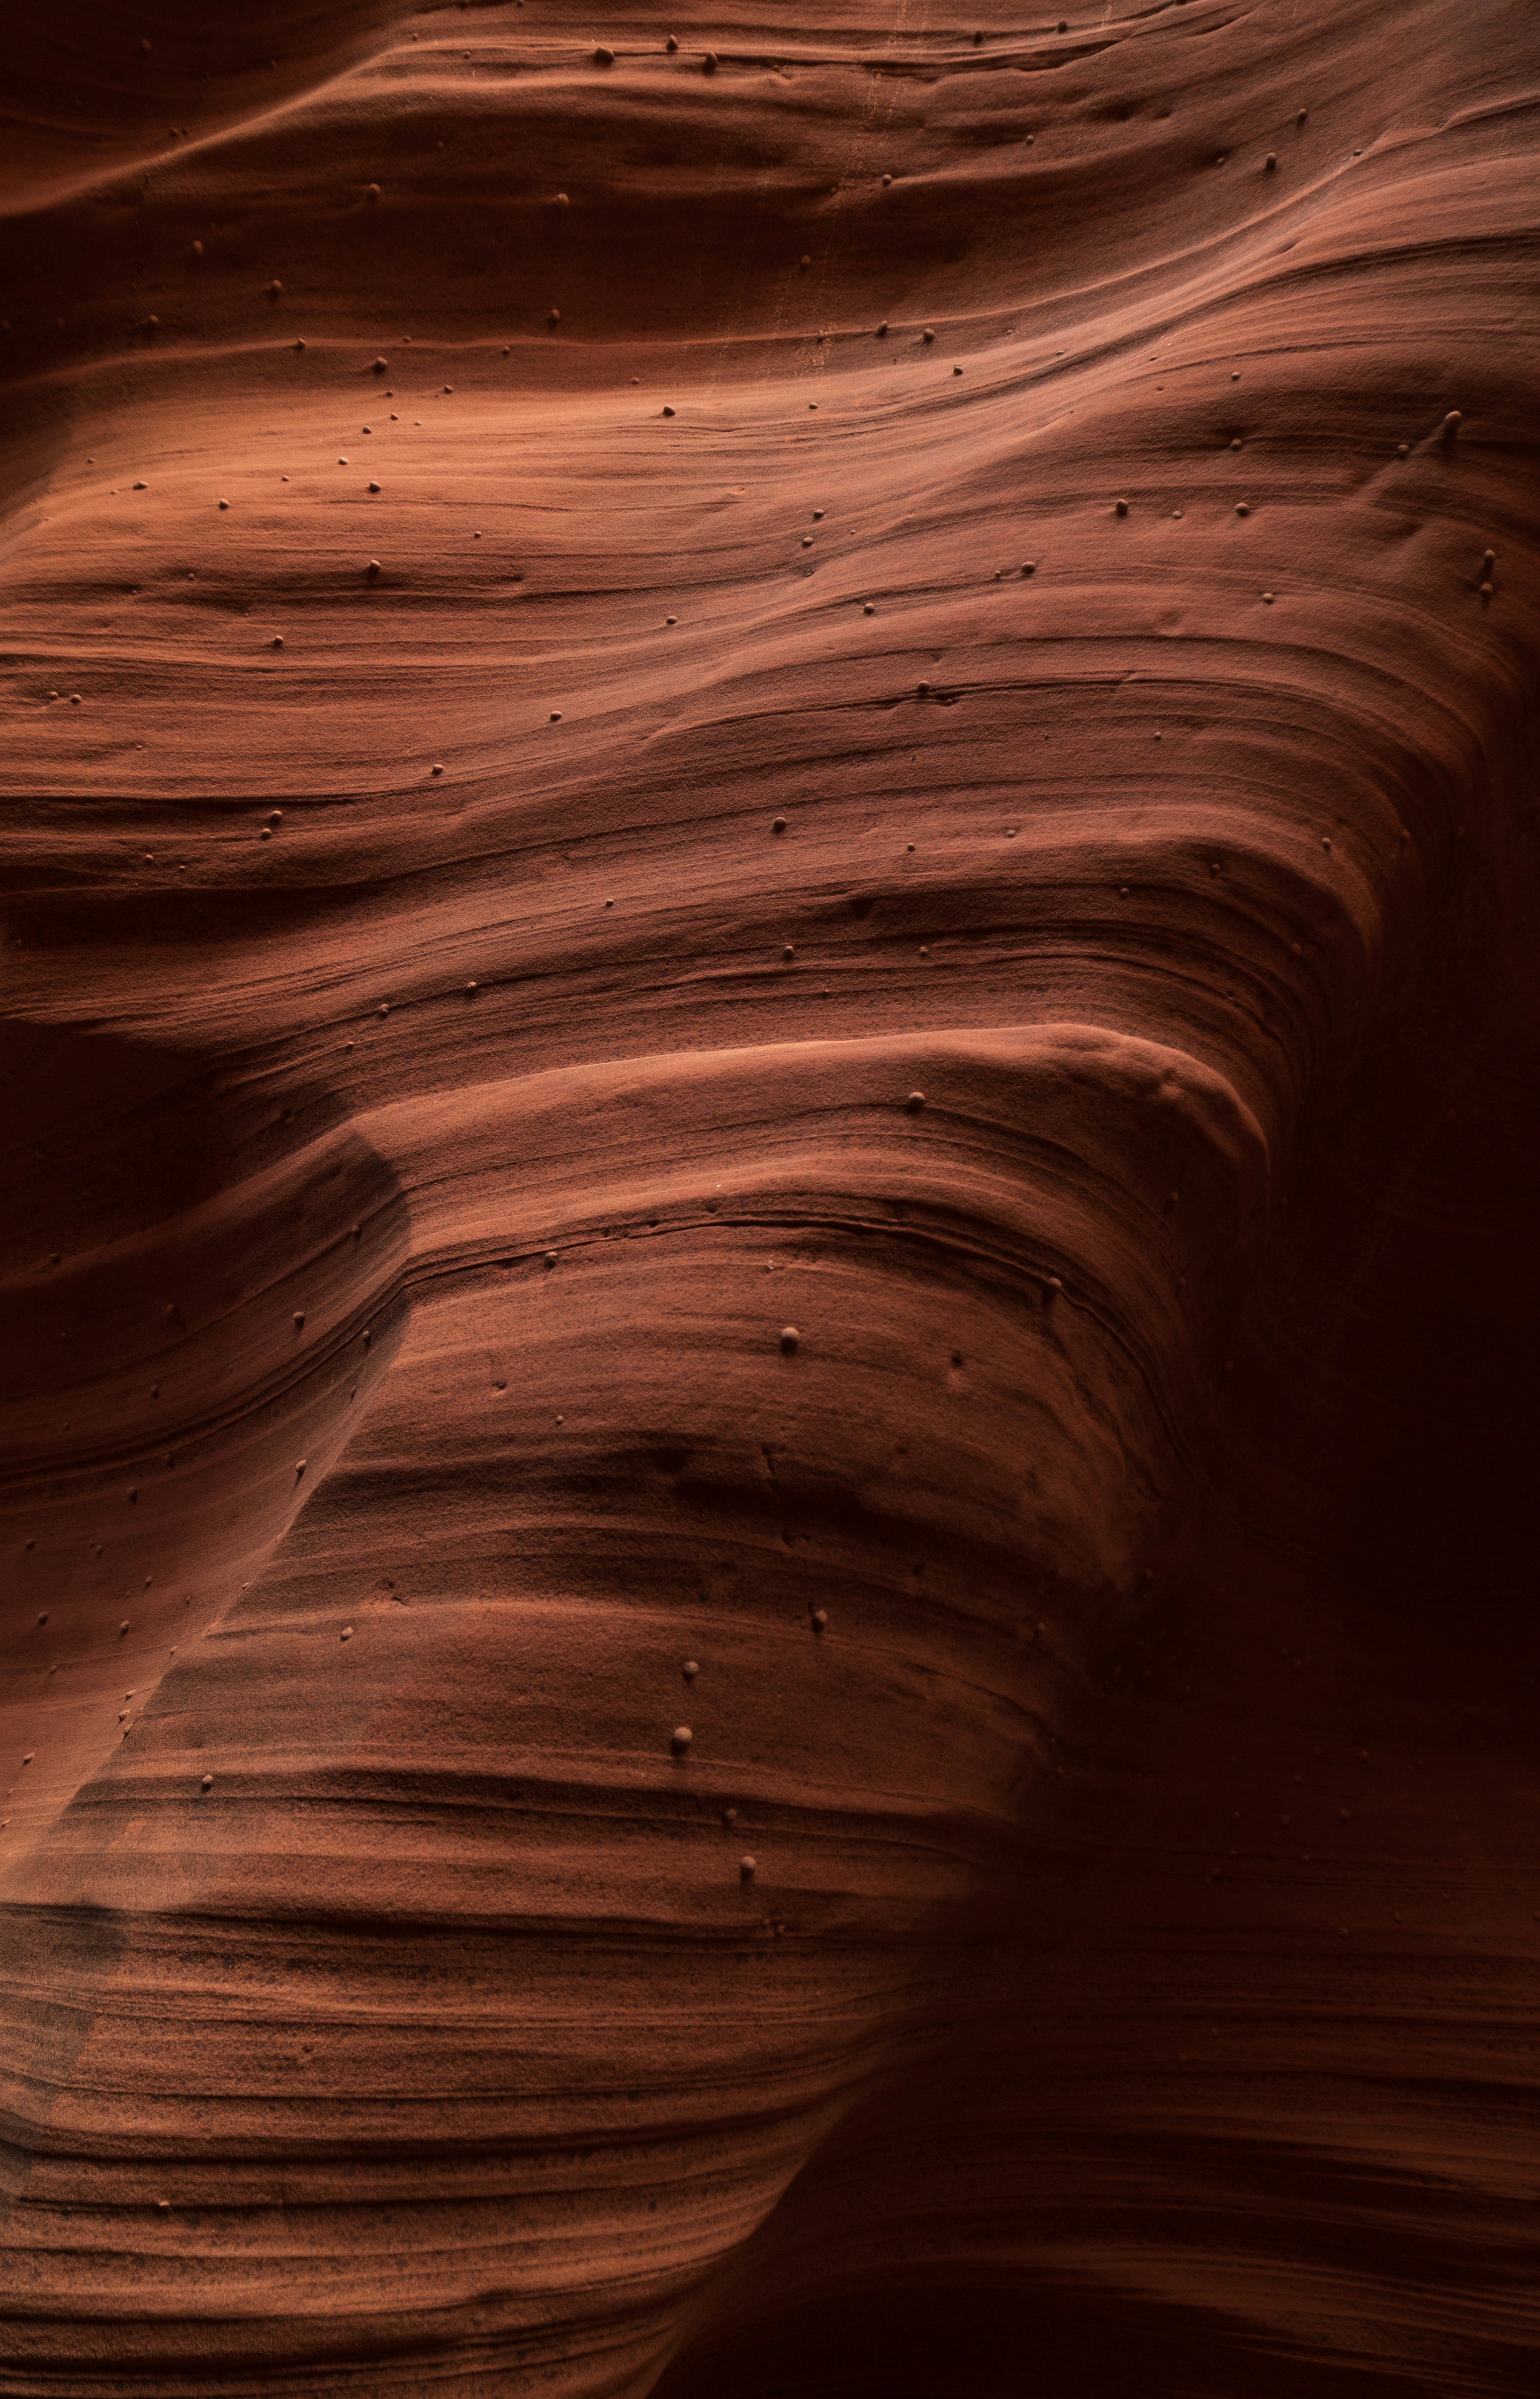 Close up details of the Antelope Canyon wall.